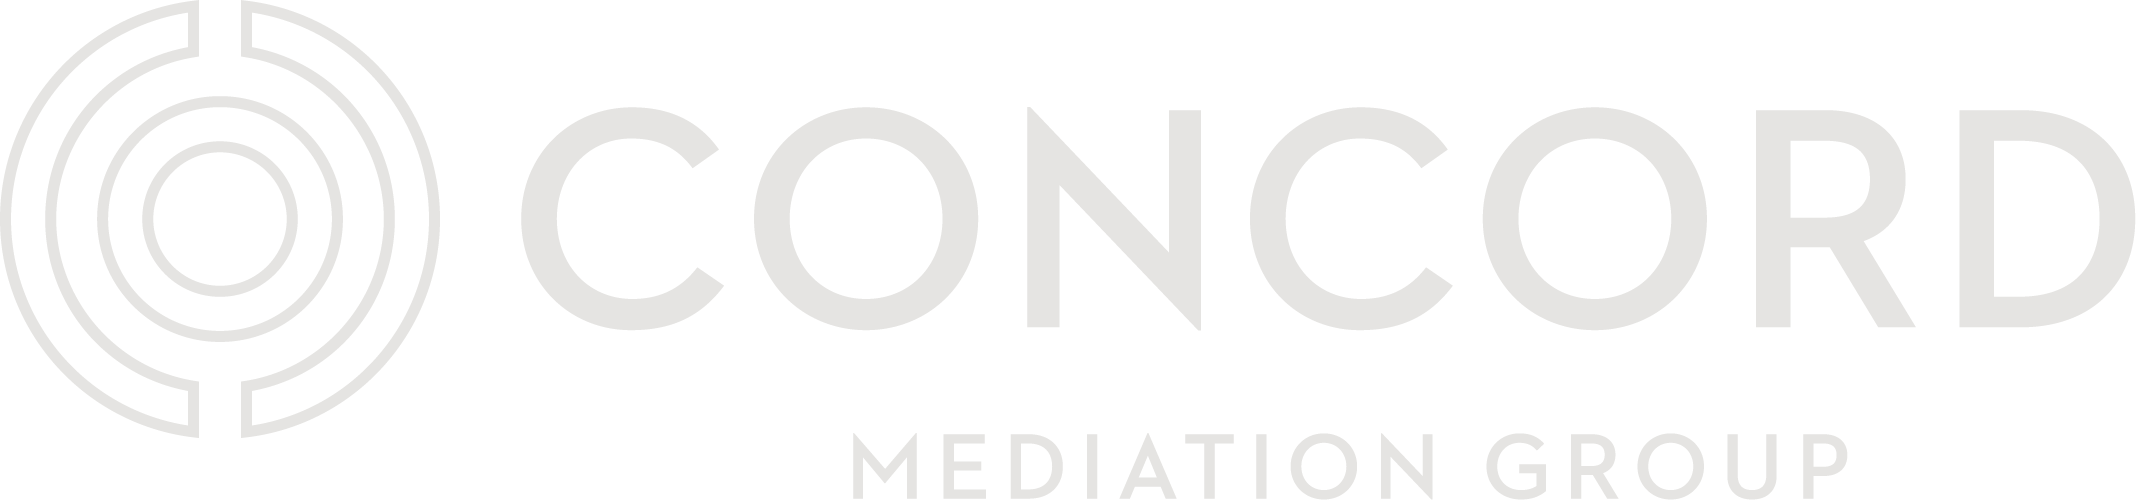 Concord Mediation Group Logo